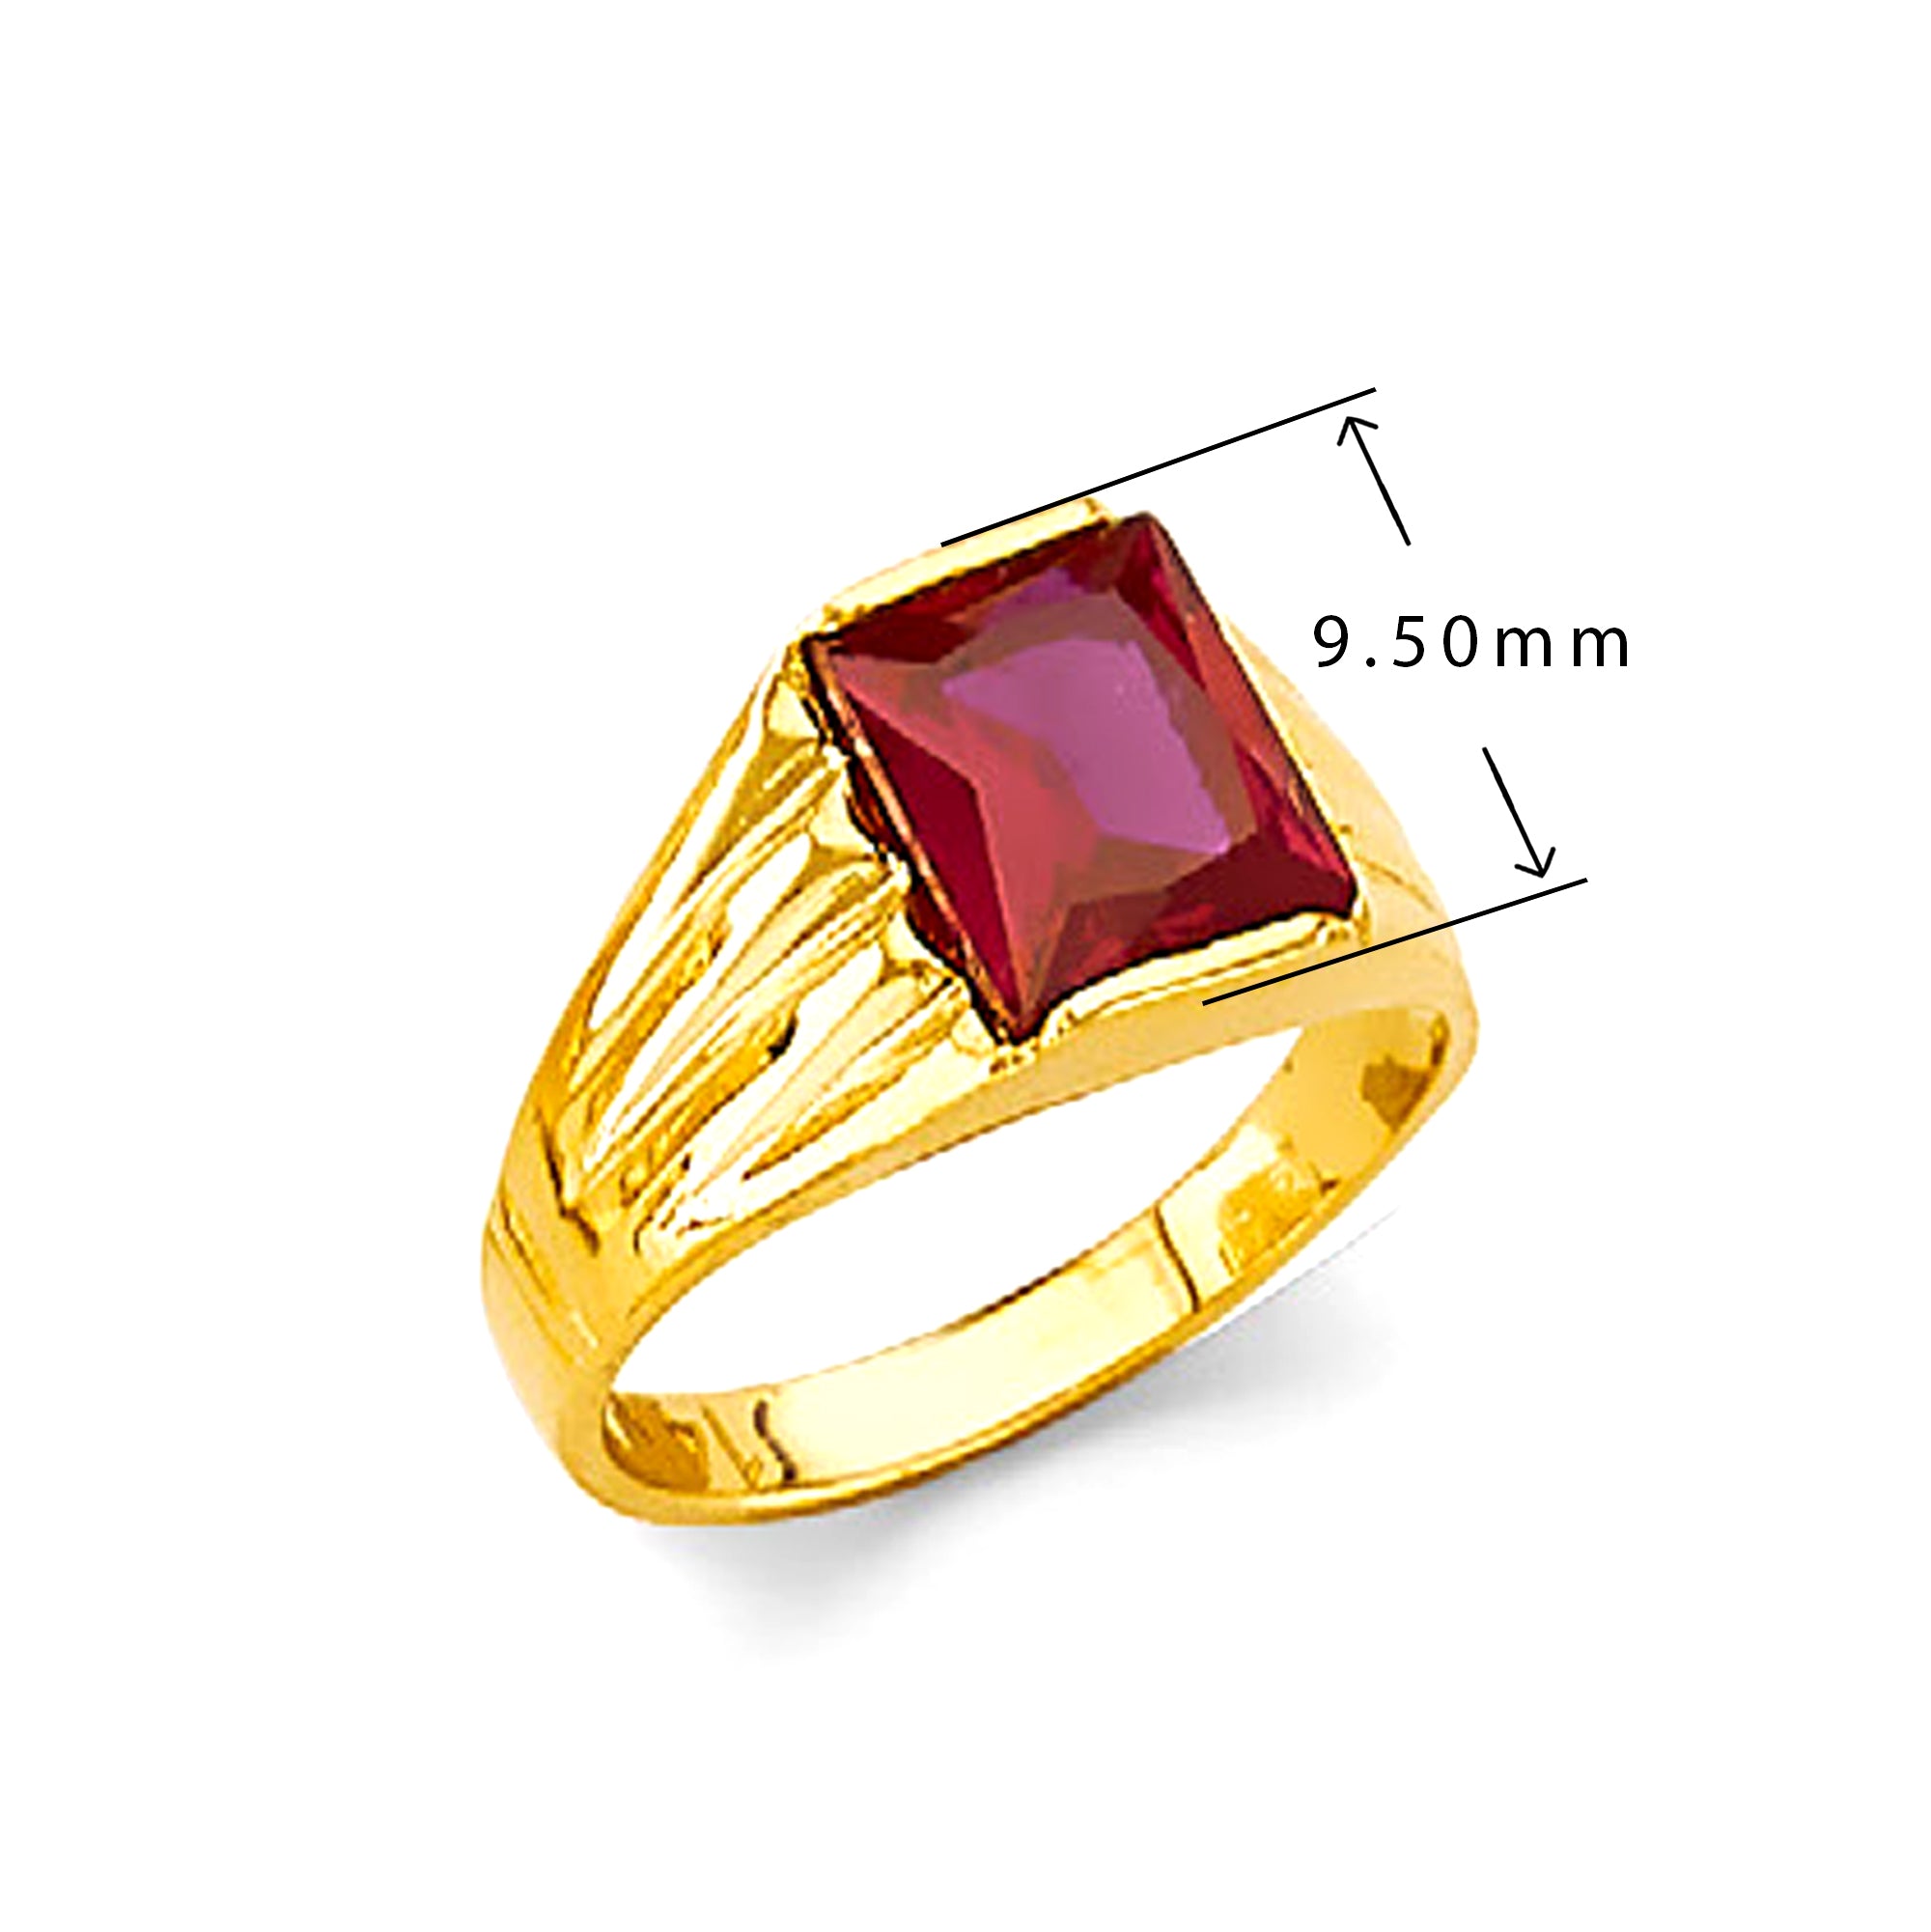 Textured Ruby Gemstone Ring in Solid Gold with Measurement